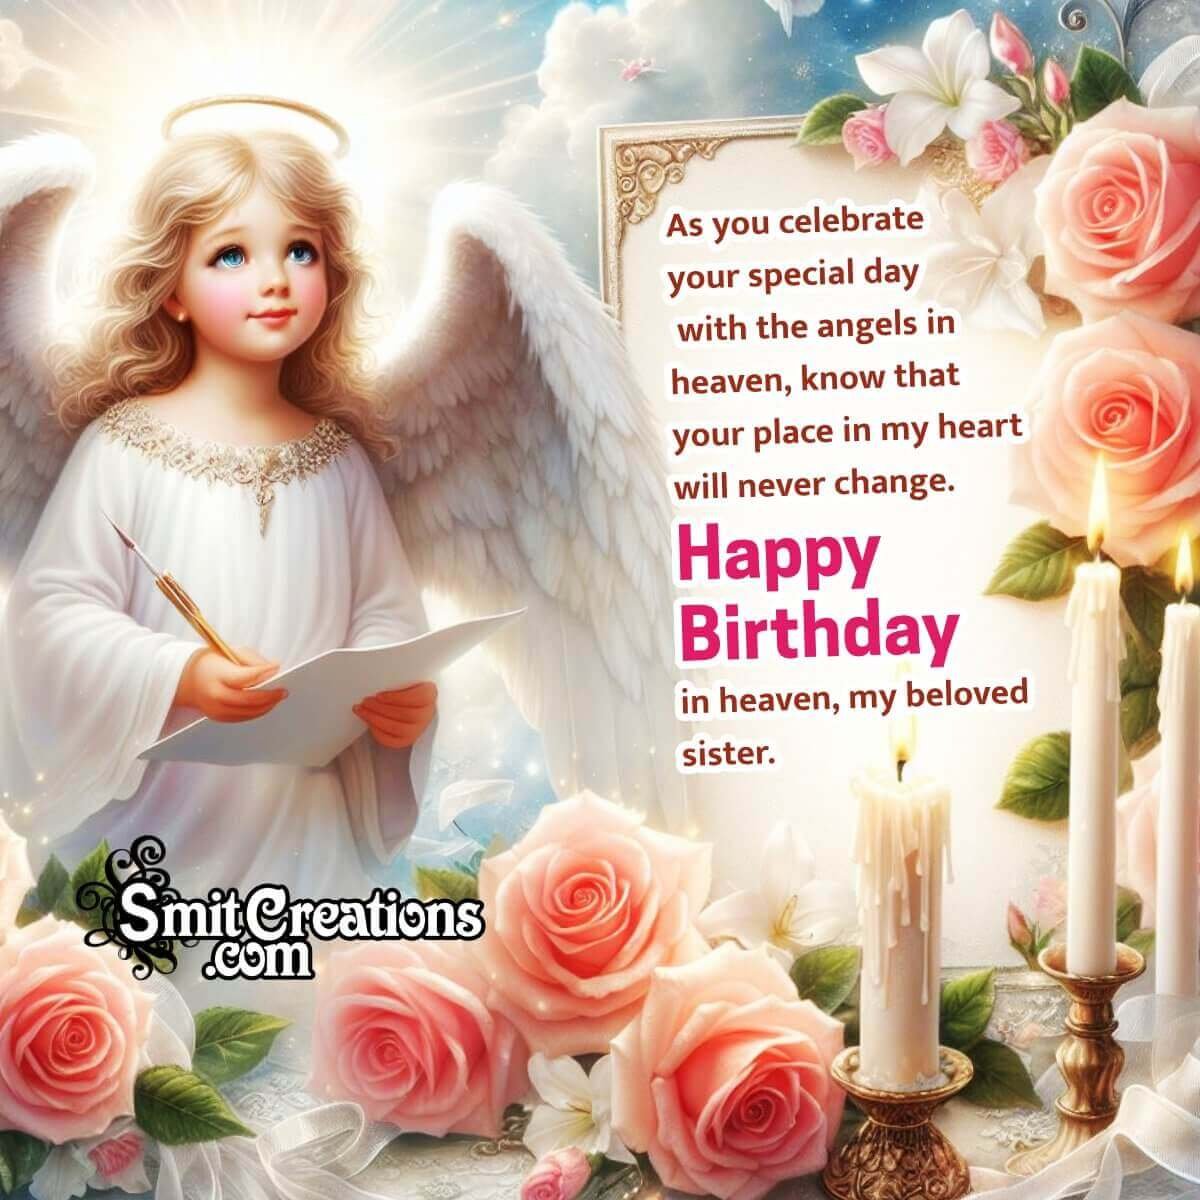 Happy Birthday Wish Pic For Sister In Heaven